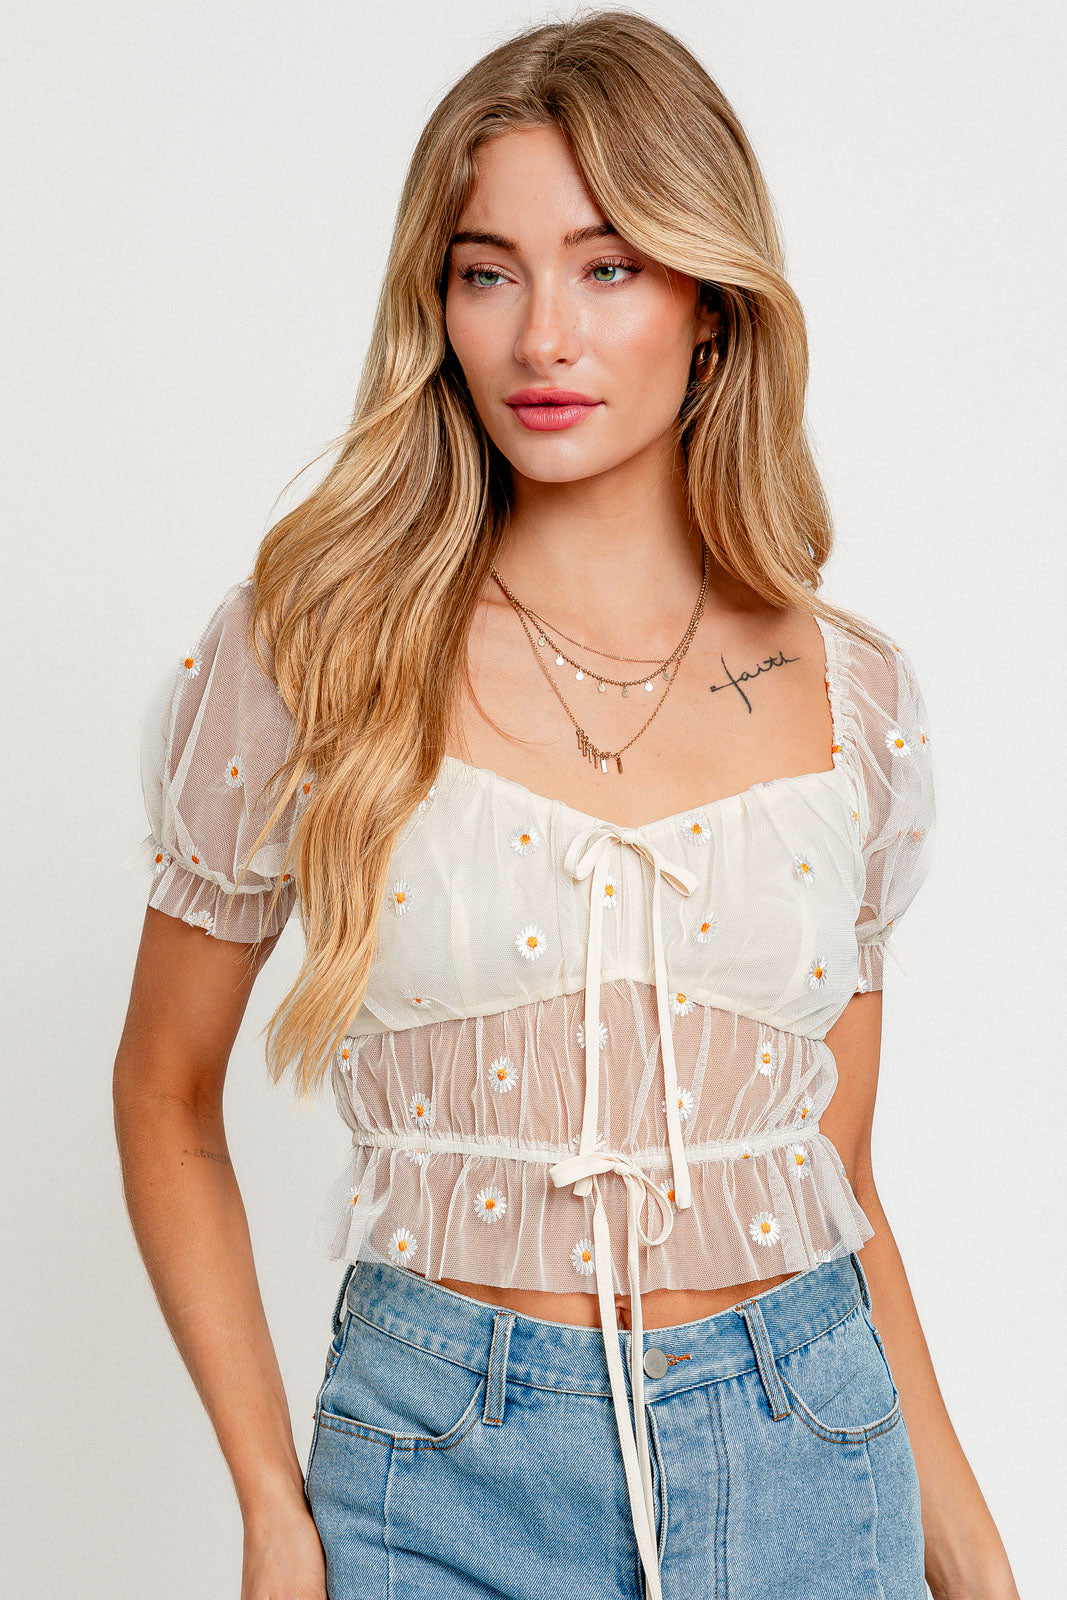 Daisy Embroidered Crop Top